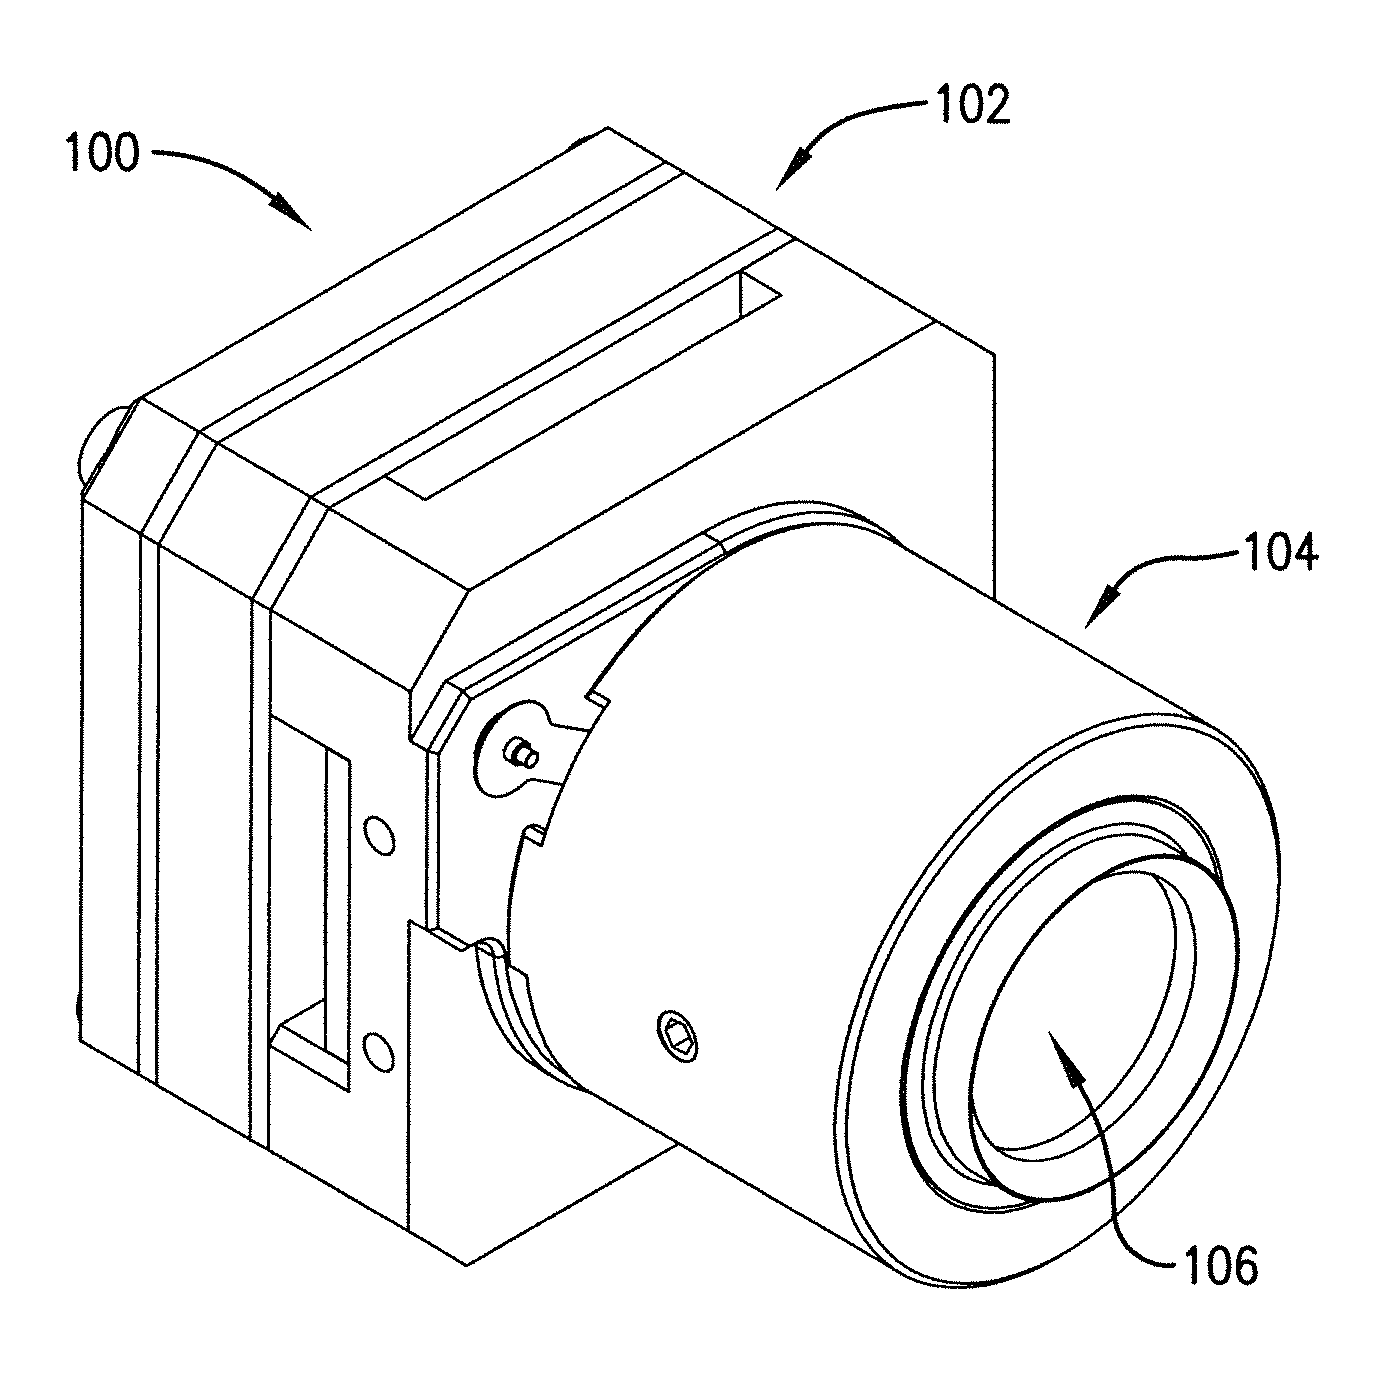 Camera, computer program and method for measuring thermal radiation and thermal rates of change